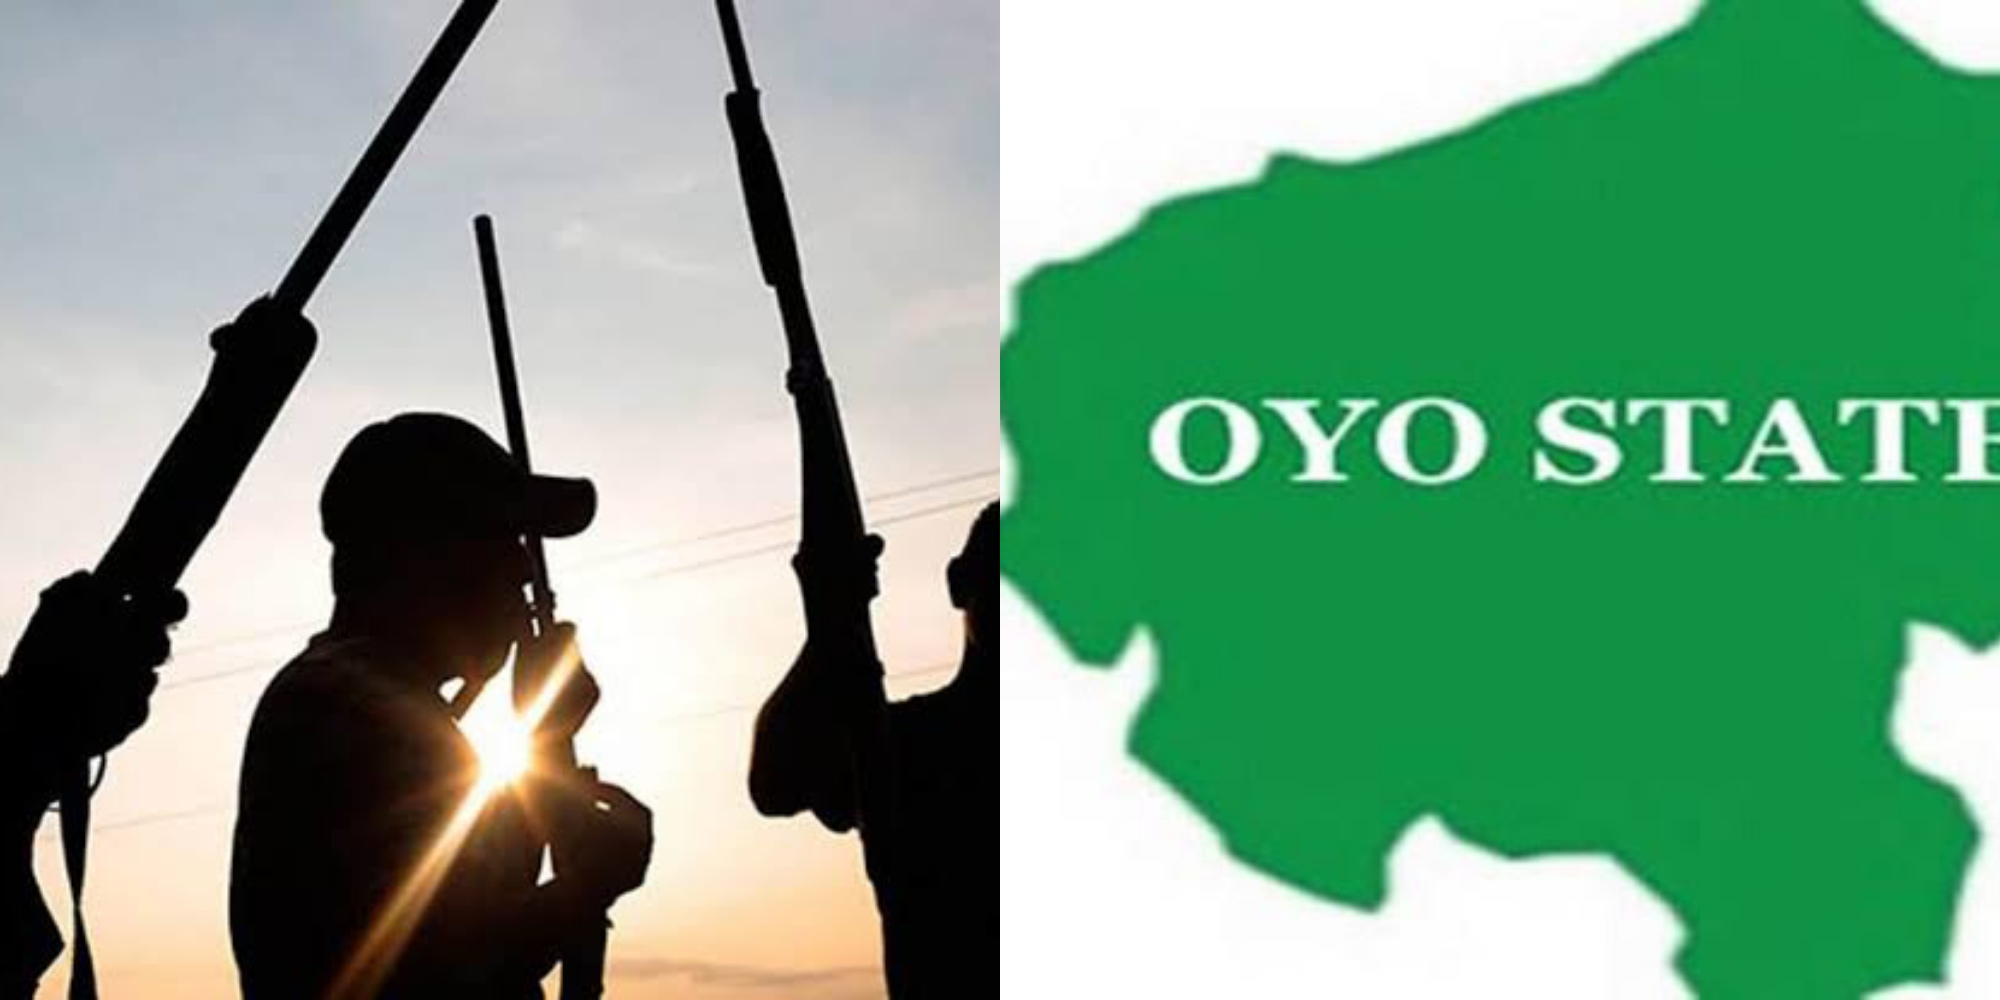 Panic over armed robbery attack in Oyo State